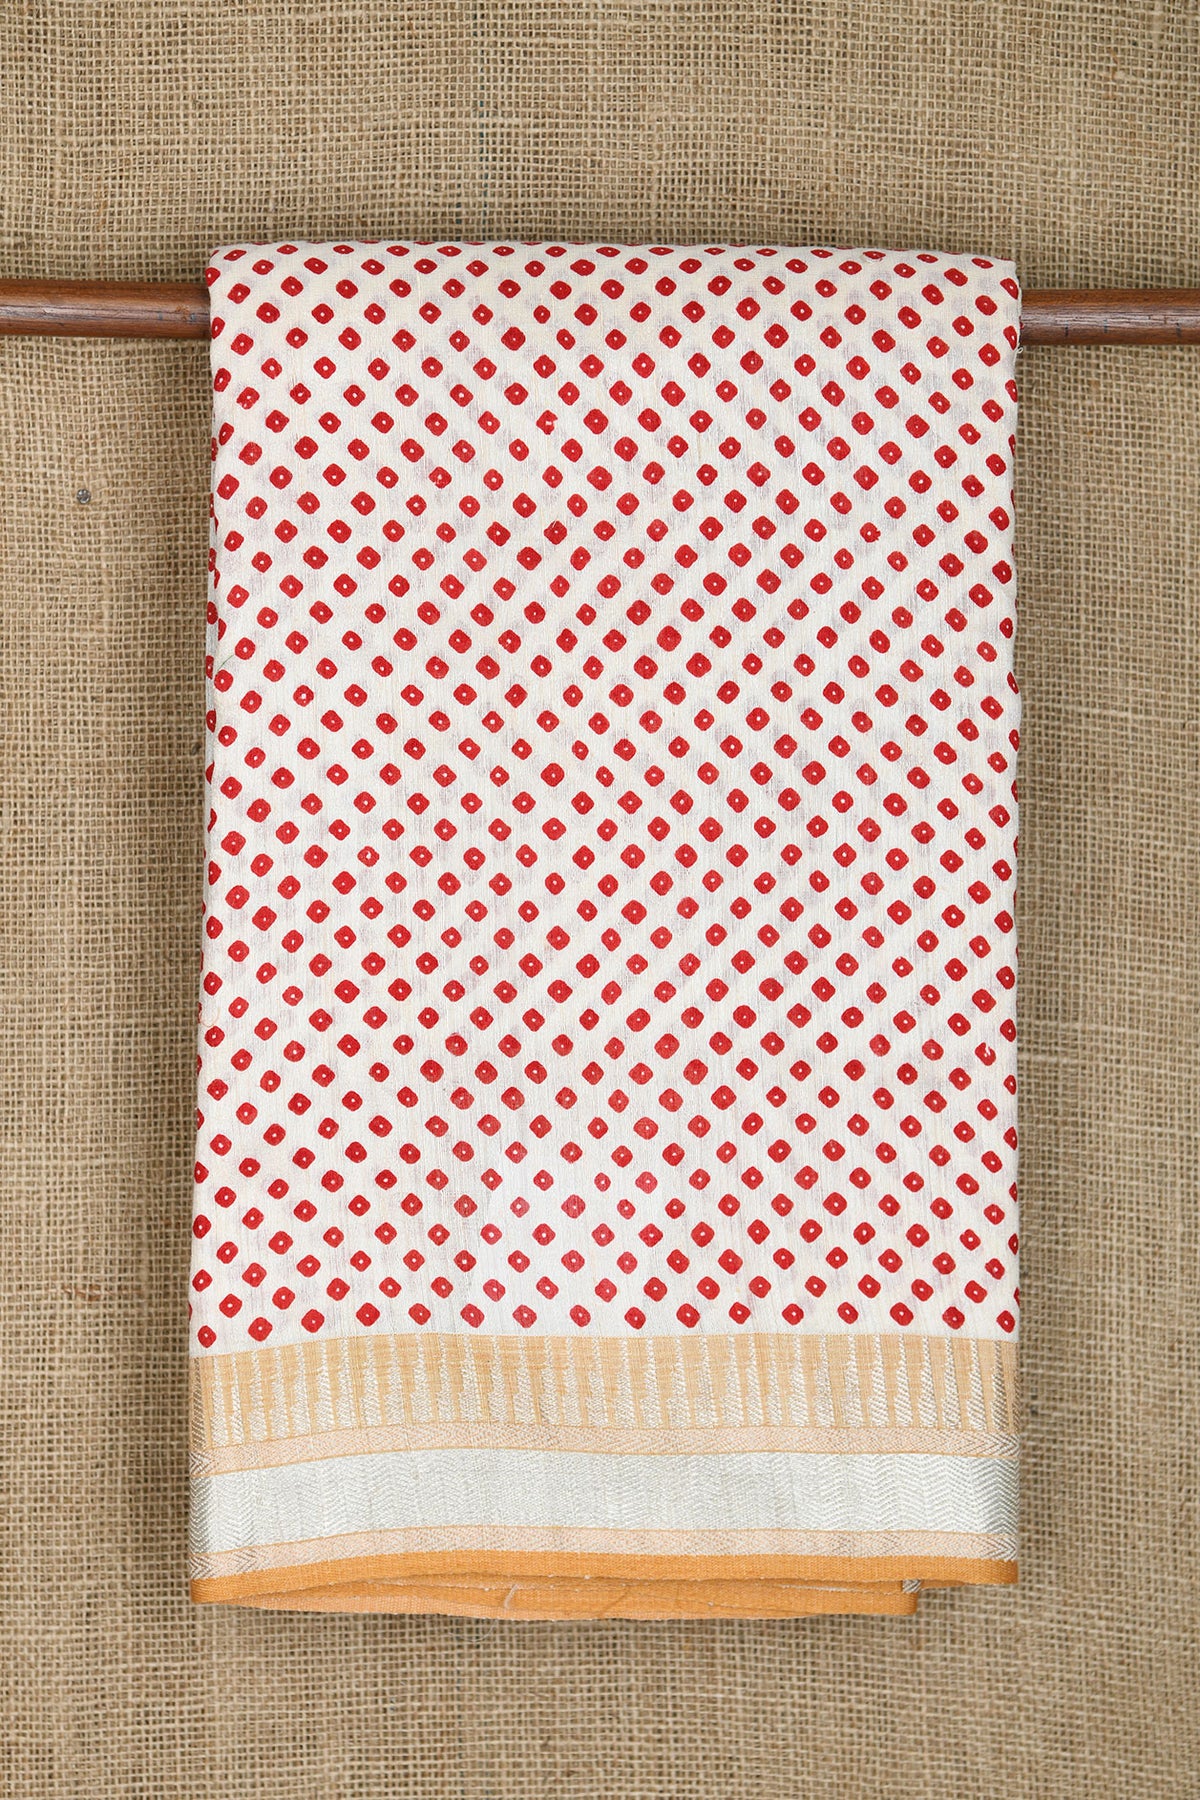 Silver Zari Border With Bandhani Printed Off White And Red Linen Tussar Saree